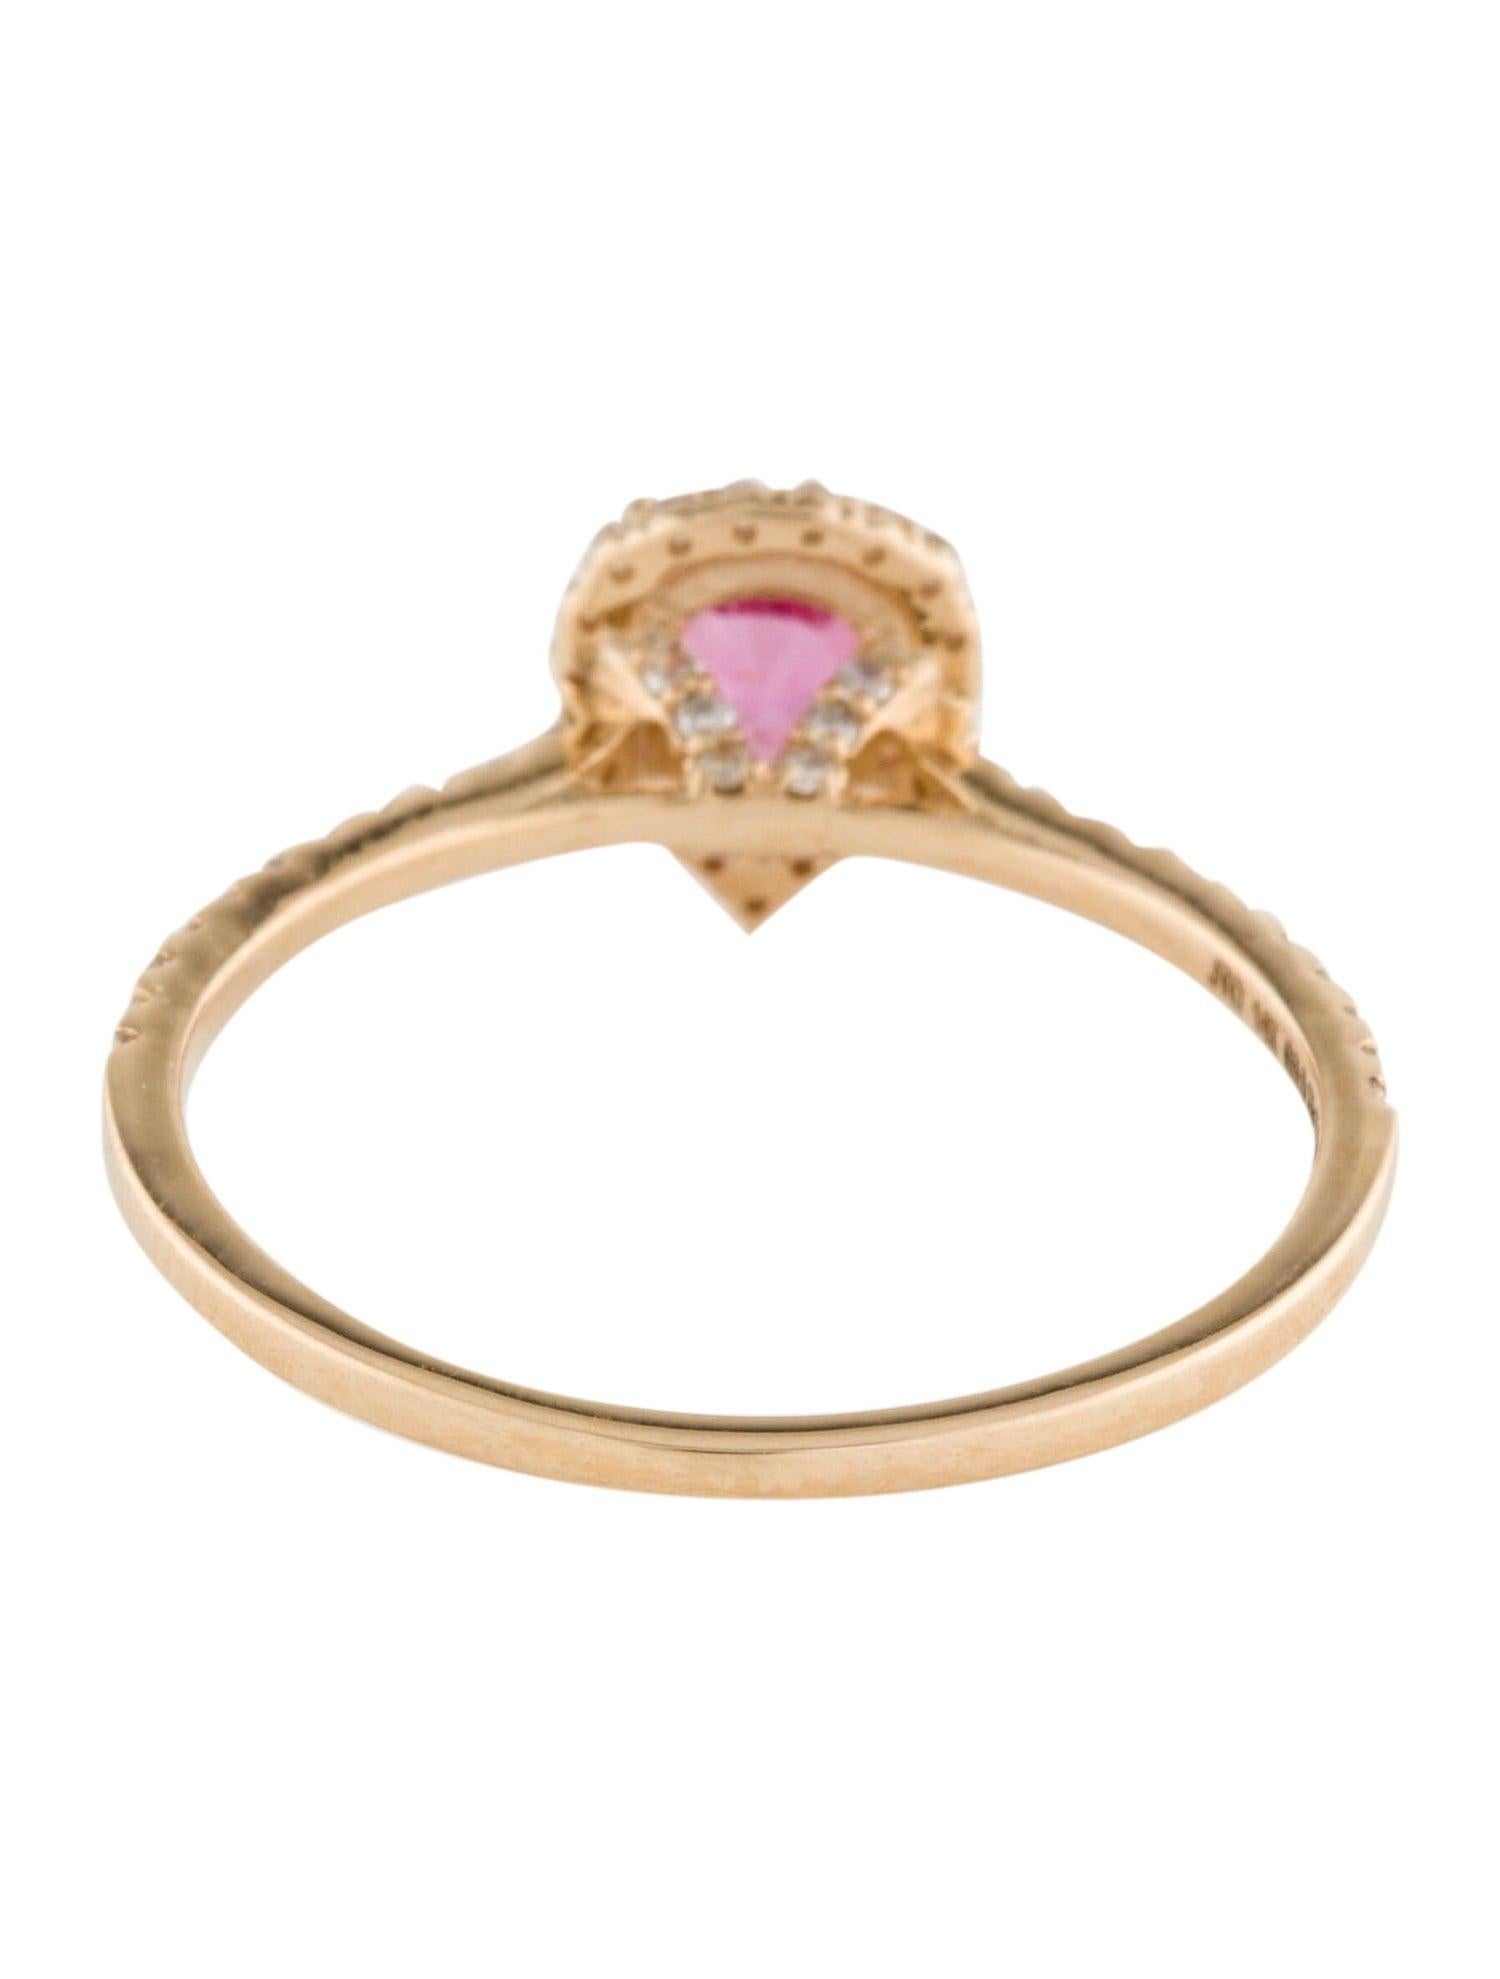 Brilliant Cut Gorgeous 14K Pink Sapphire & Diamond Cocktail Ring - Size 7  Elegant Jewelry For Sale